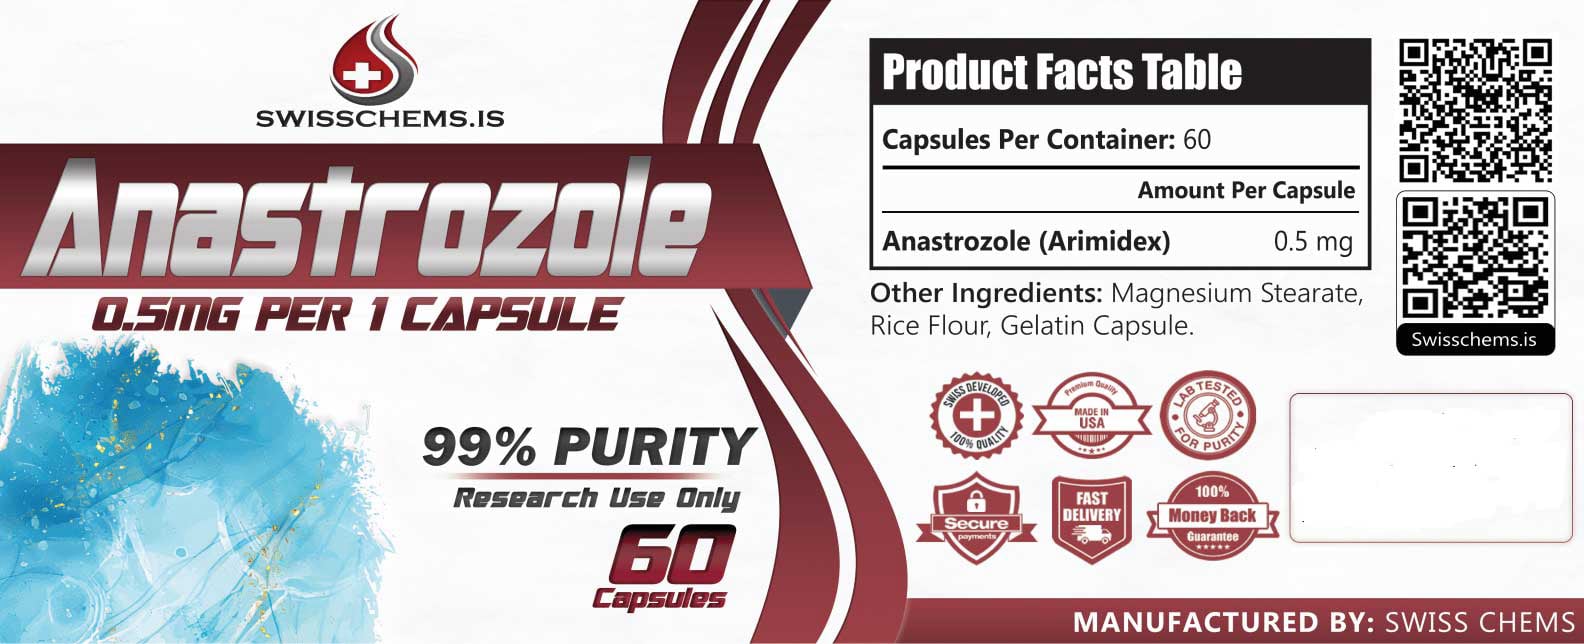 swiss chems anastrozole product image